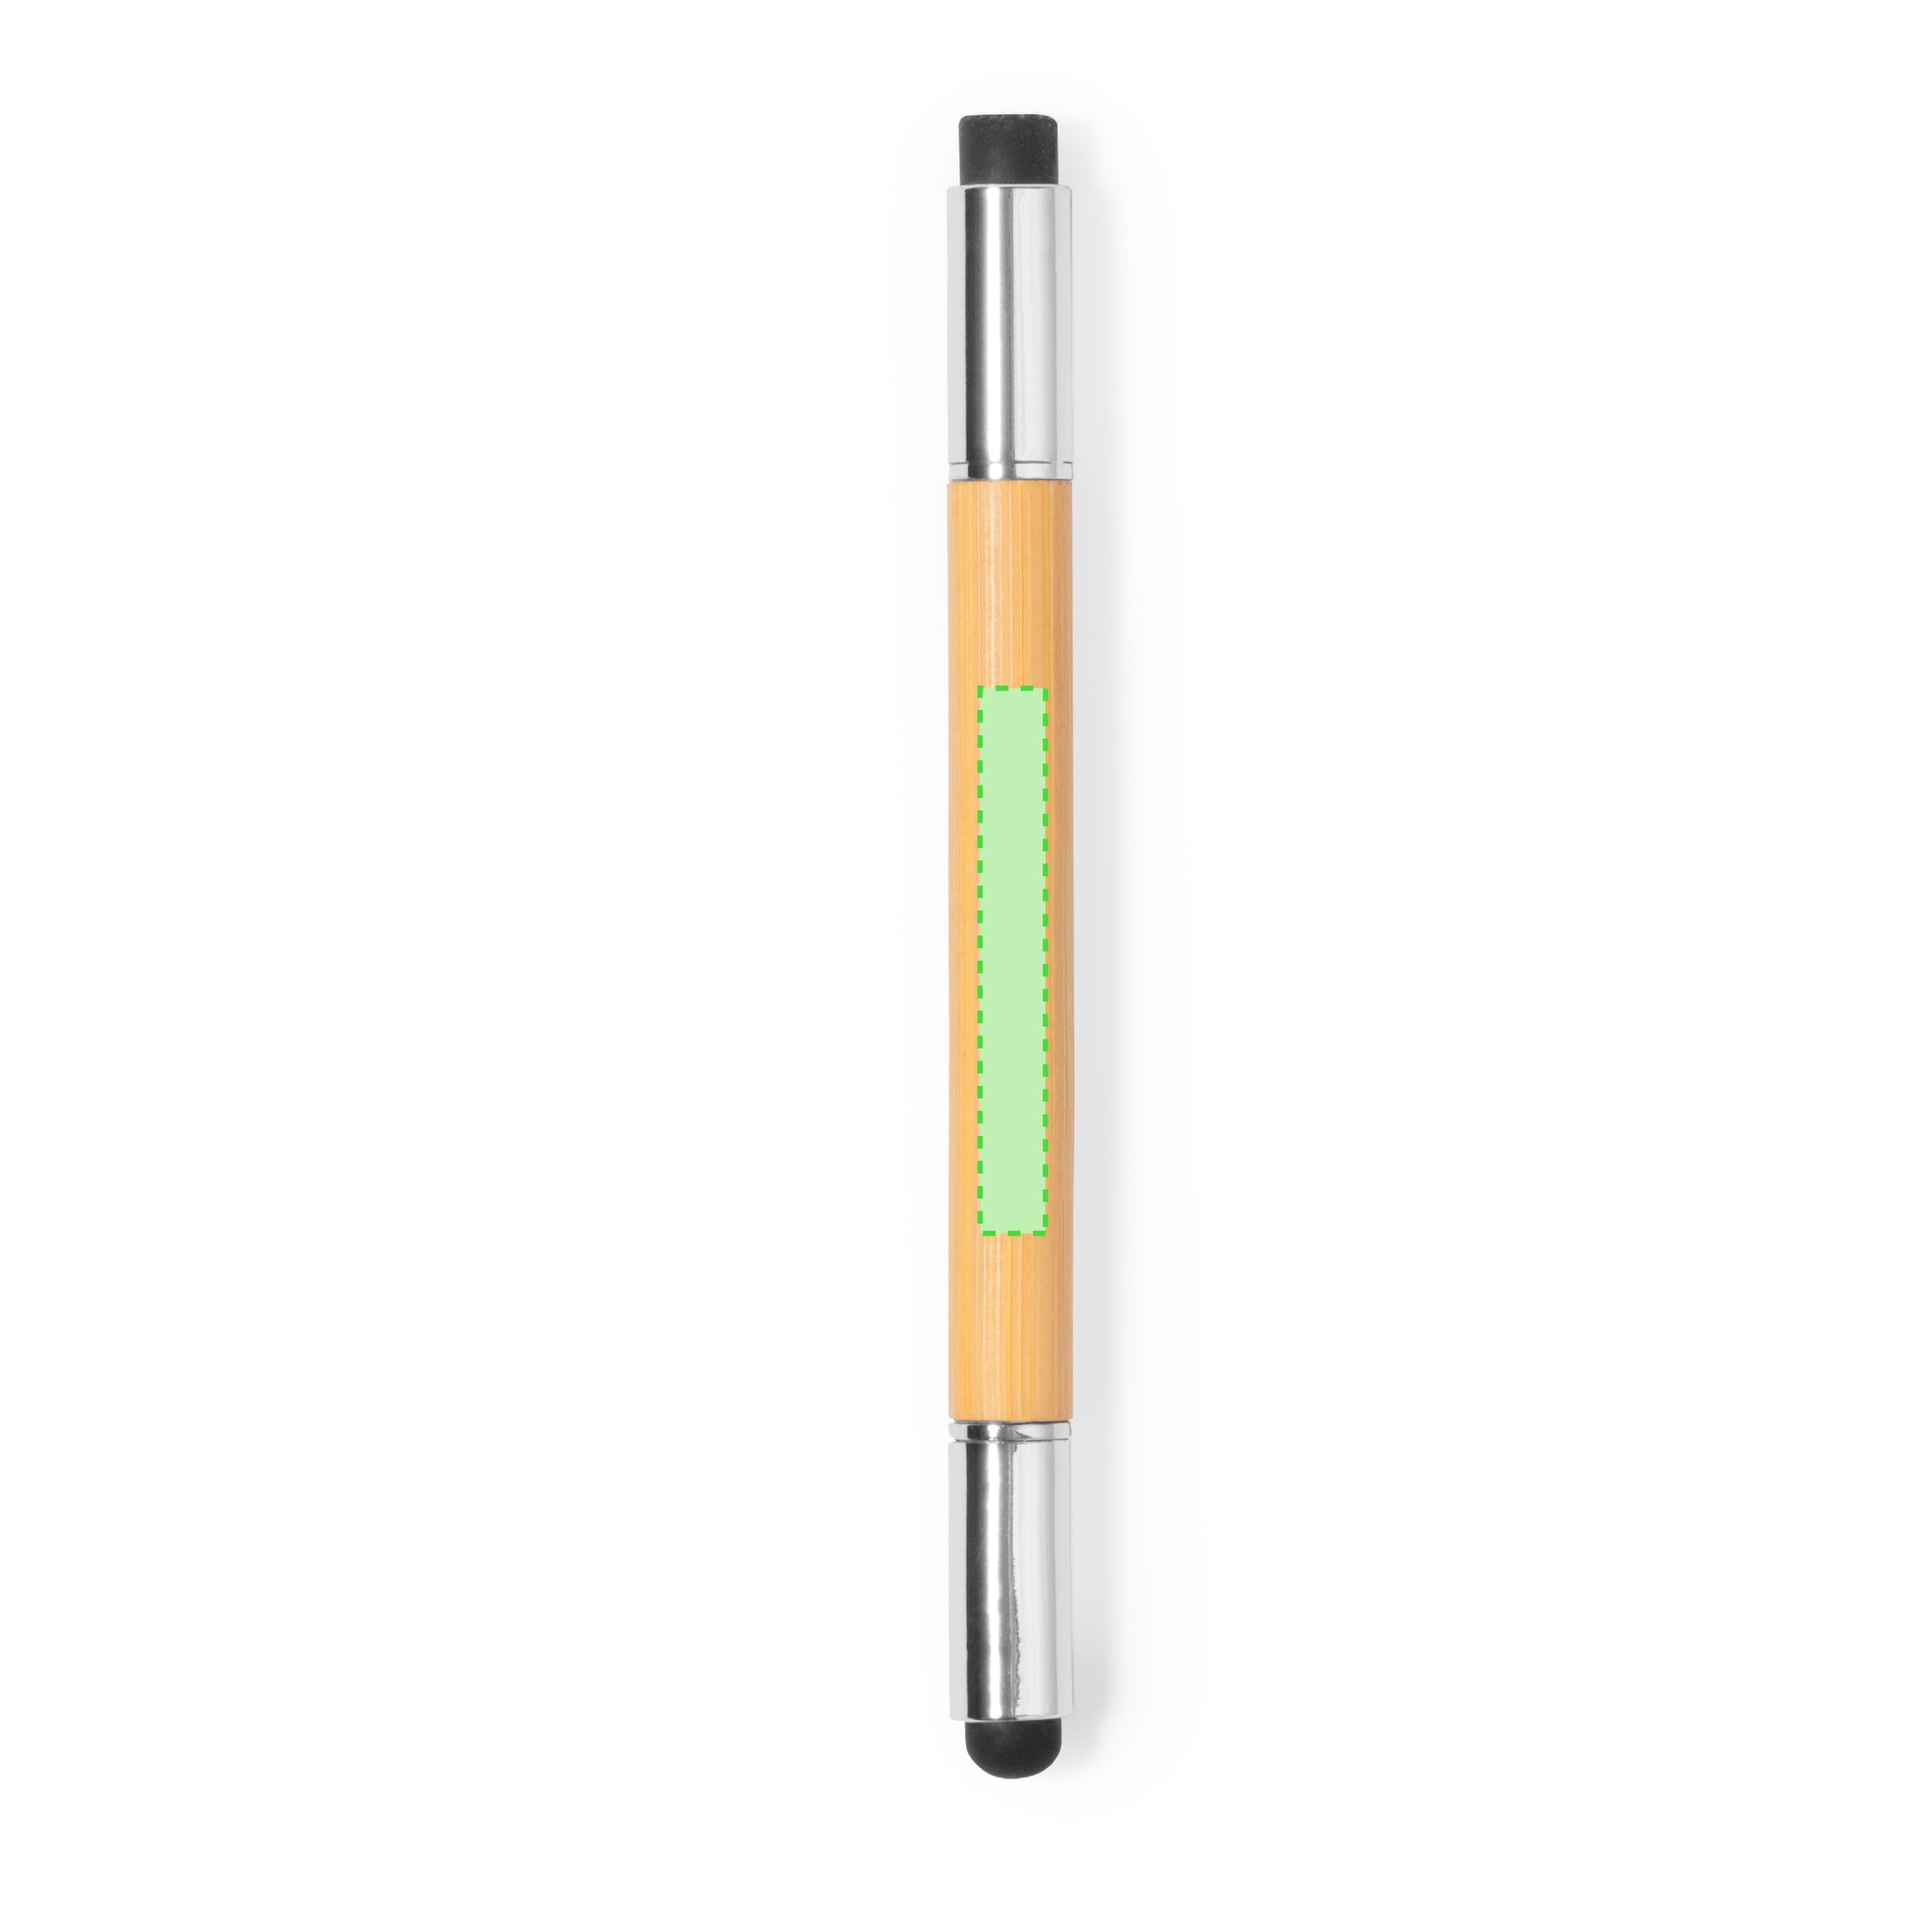 Eternal Pencil Pen · Includes Pencil and Ballpoint · Cotton Gift Bag · Recording Included · Customizable · Ref 20183